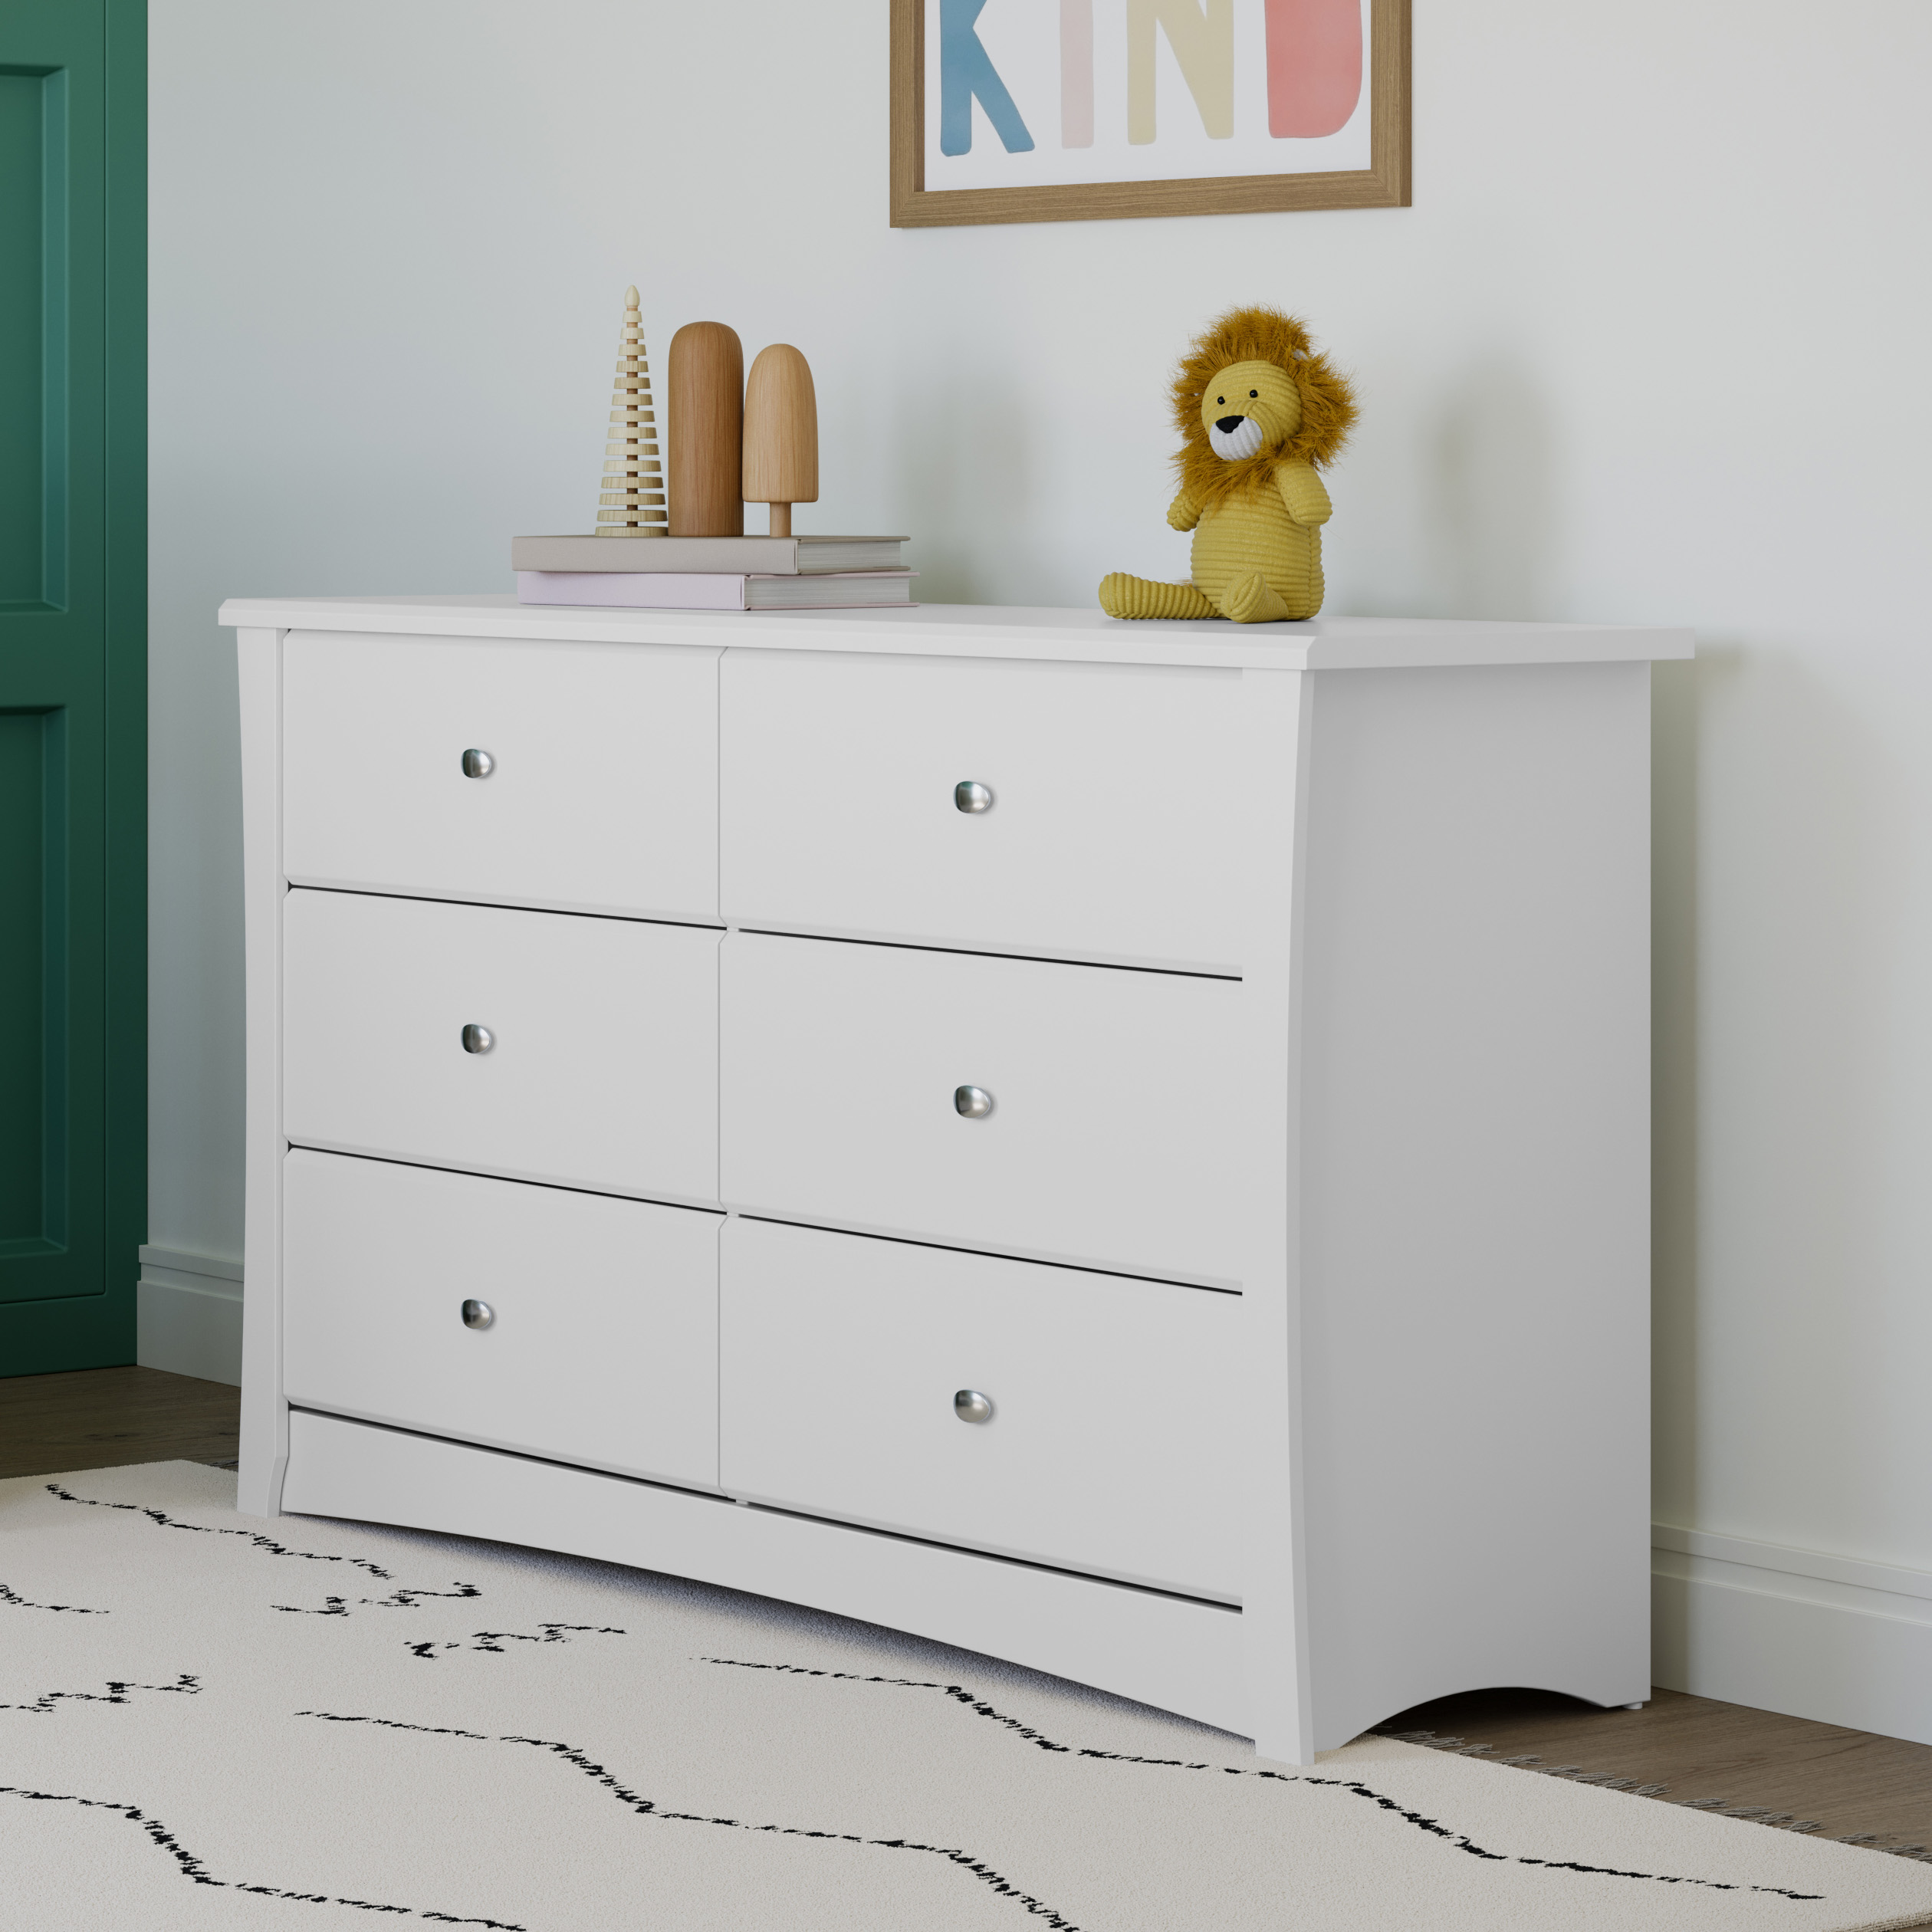 Storkcraft Crescent 6 Drawer Kids and Baby Double Dresser White - image 5 of 14